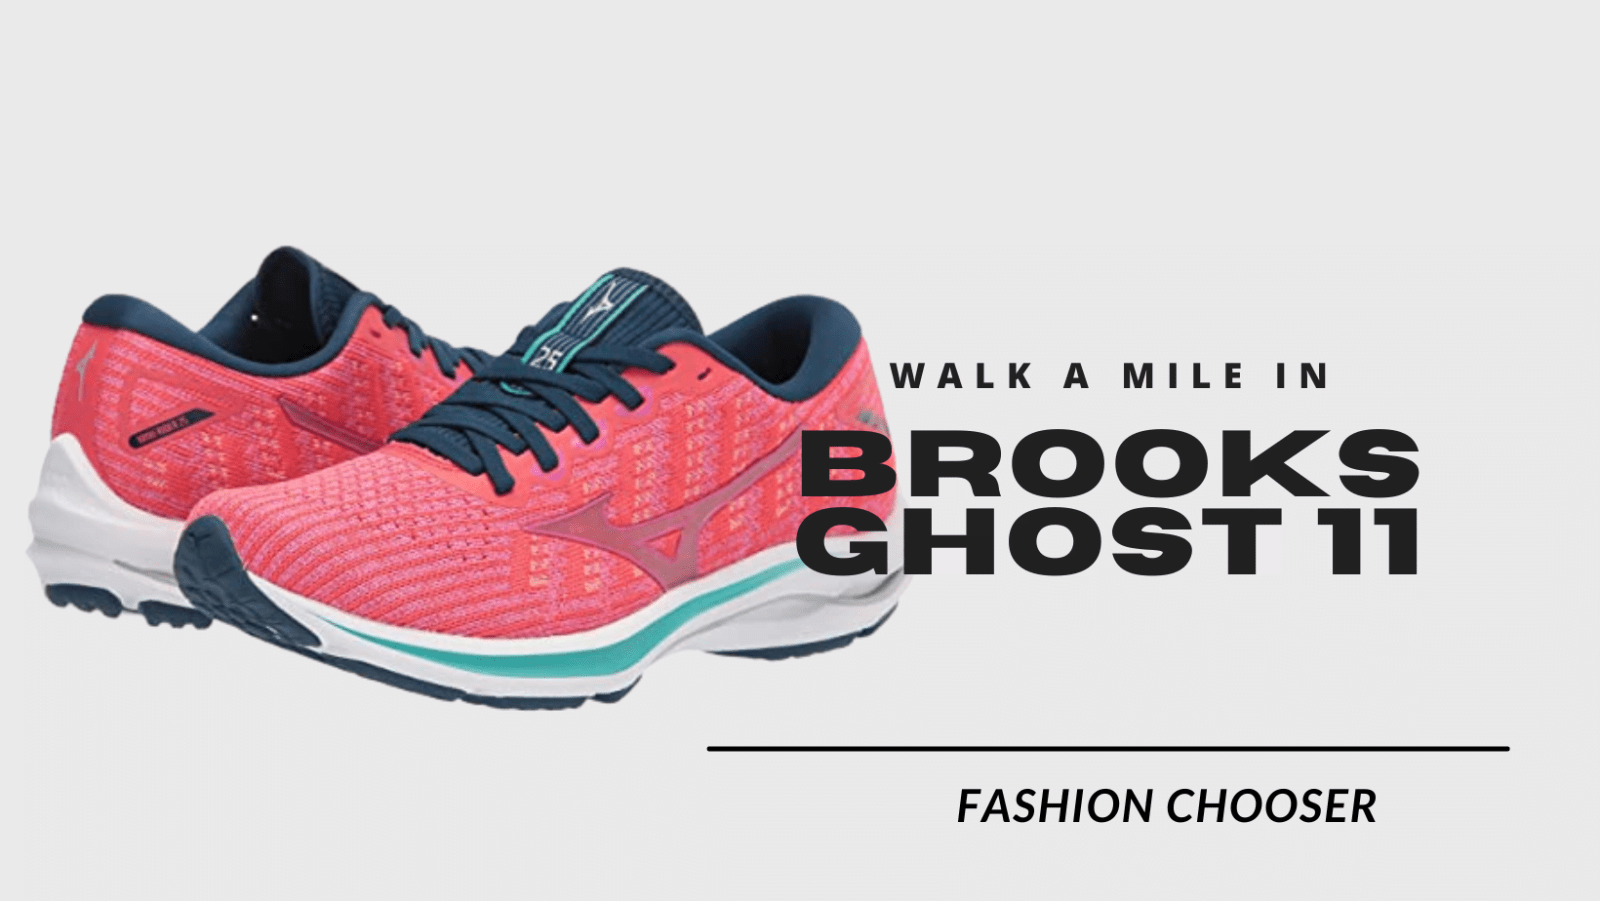 women's Running Shoes:How to Choose the Best women's Running Shoes,Best women's Shoes For Walking On Concrete | Fashion chooser | Brooks Ghost 11